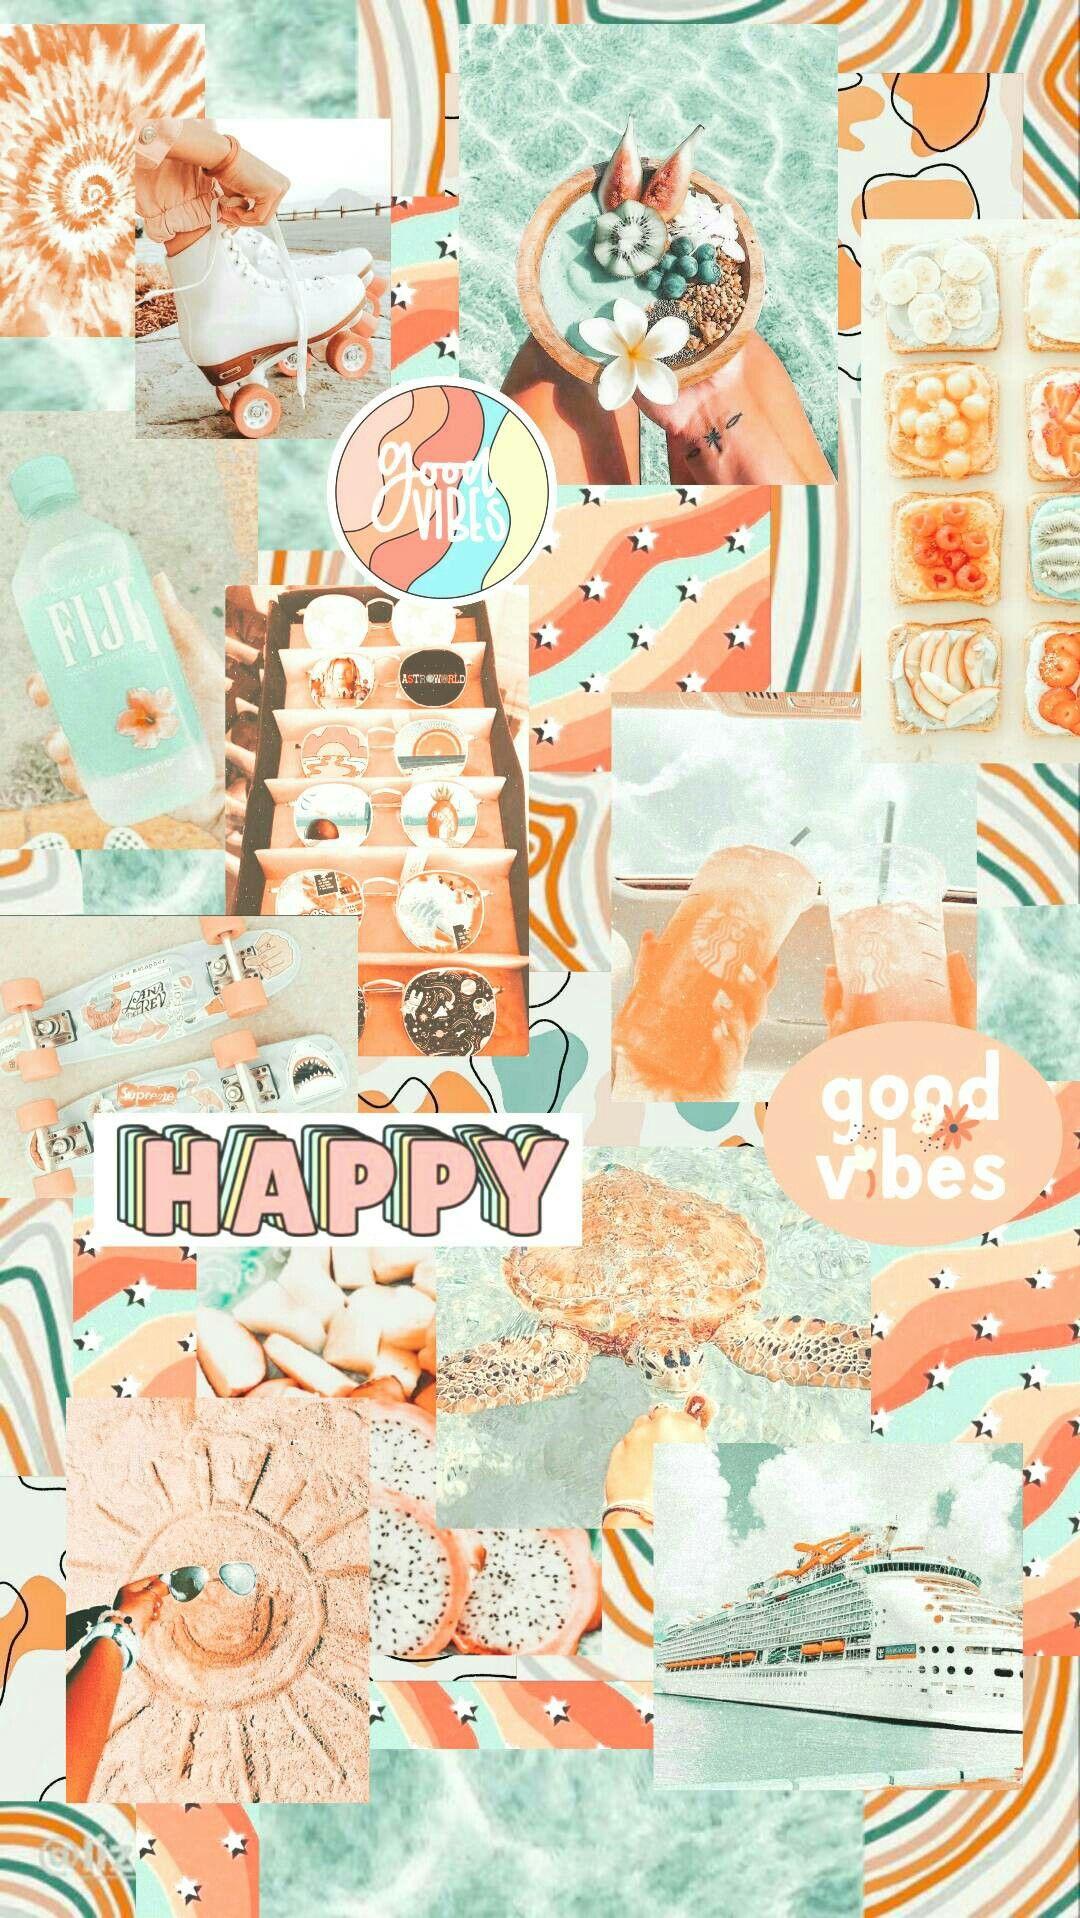 Aesthetic background collage of oranges and blues - Summer